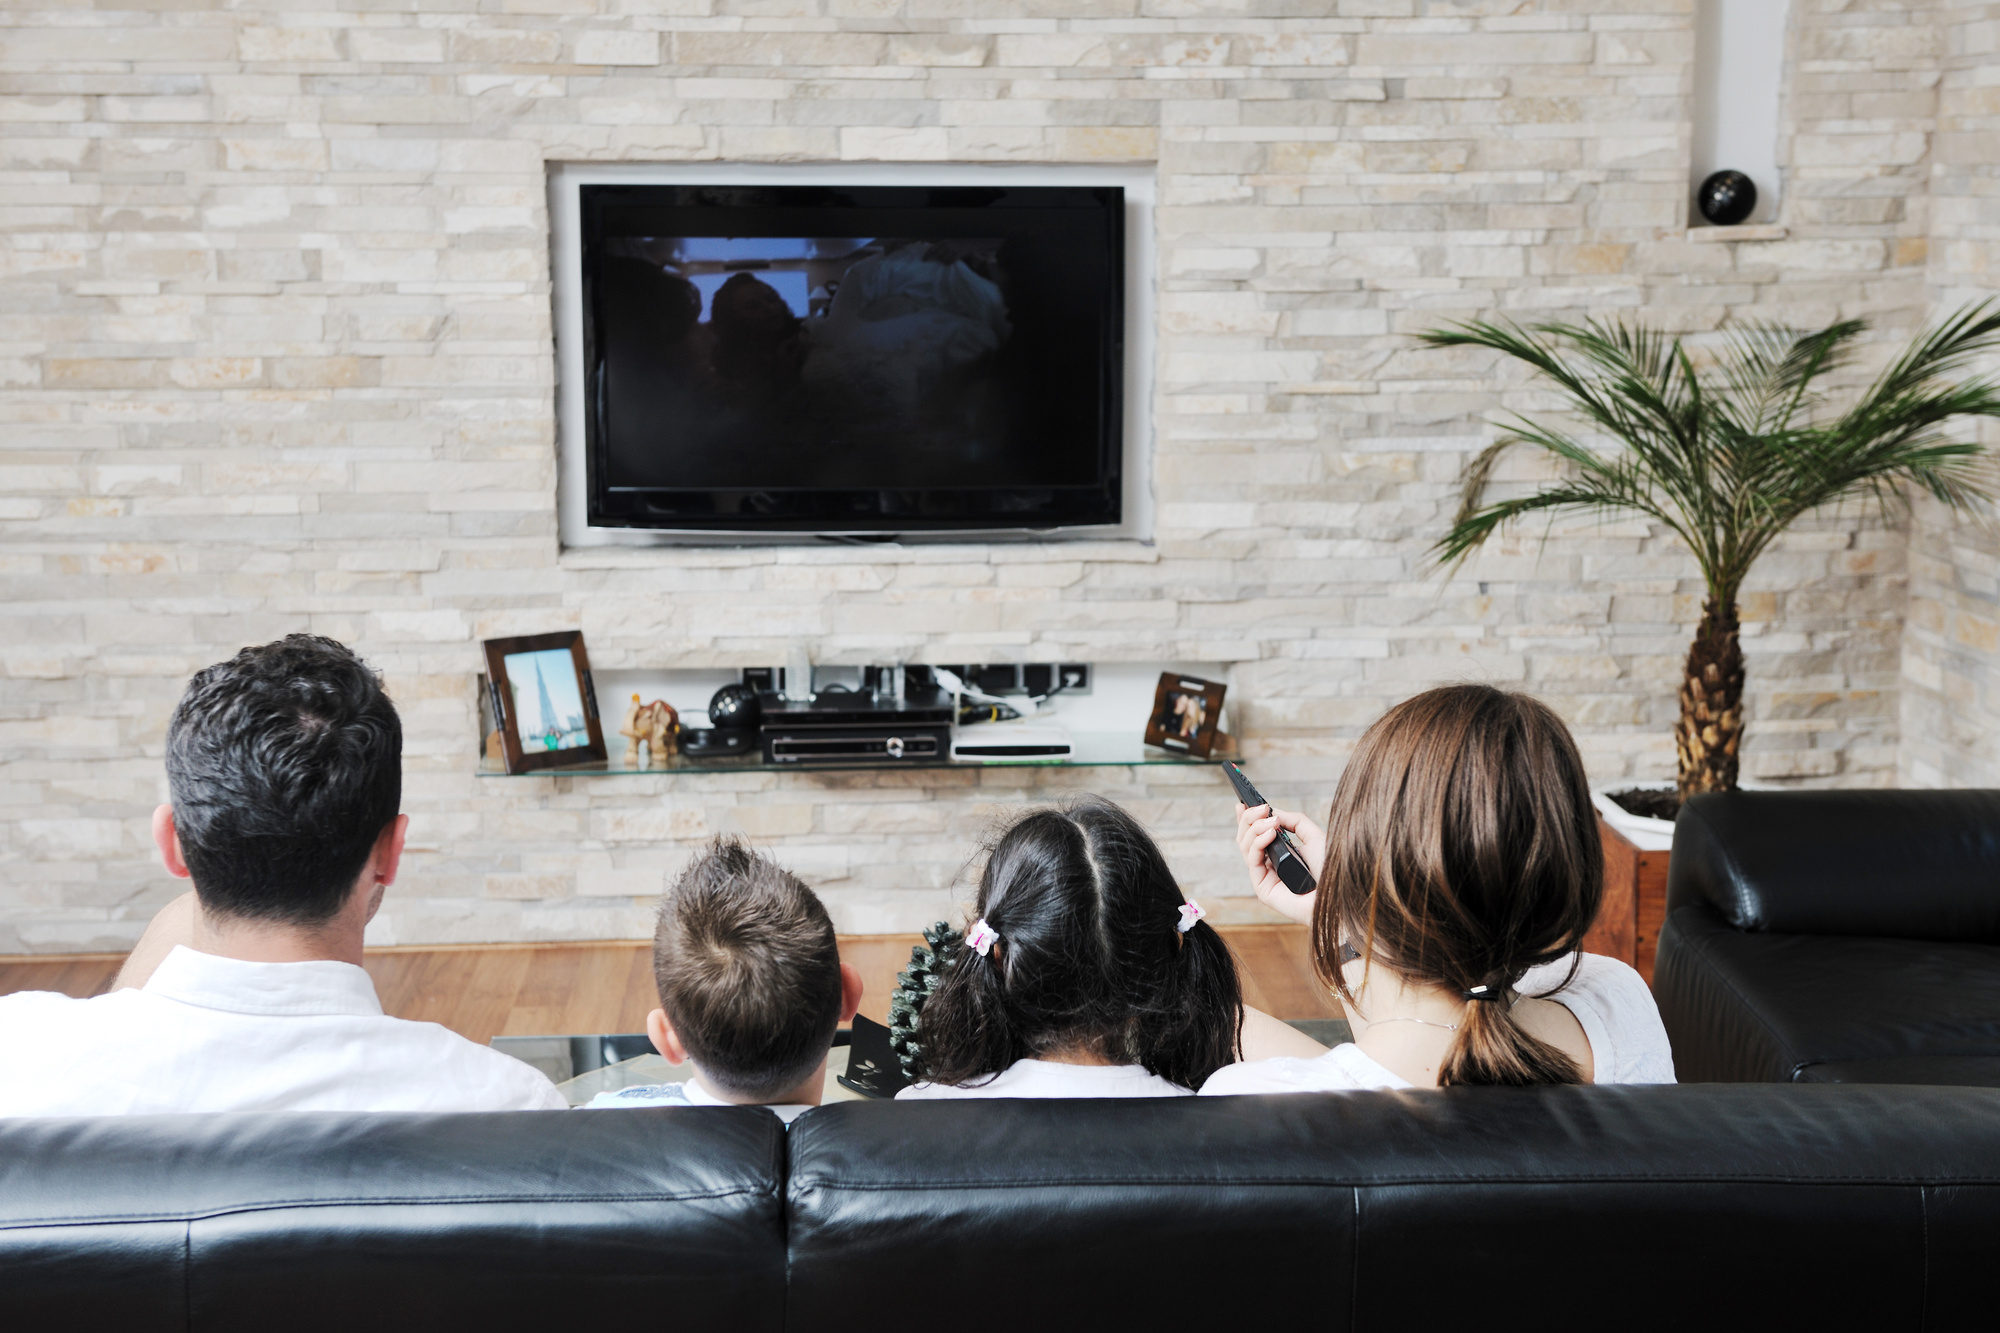 Skip the Cinema: 7 Reasons Why Watching Movies at Home is Way Better